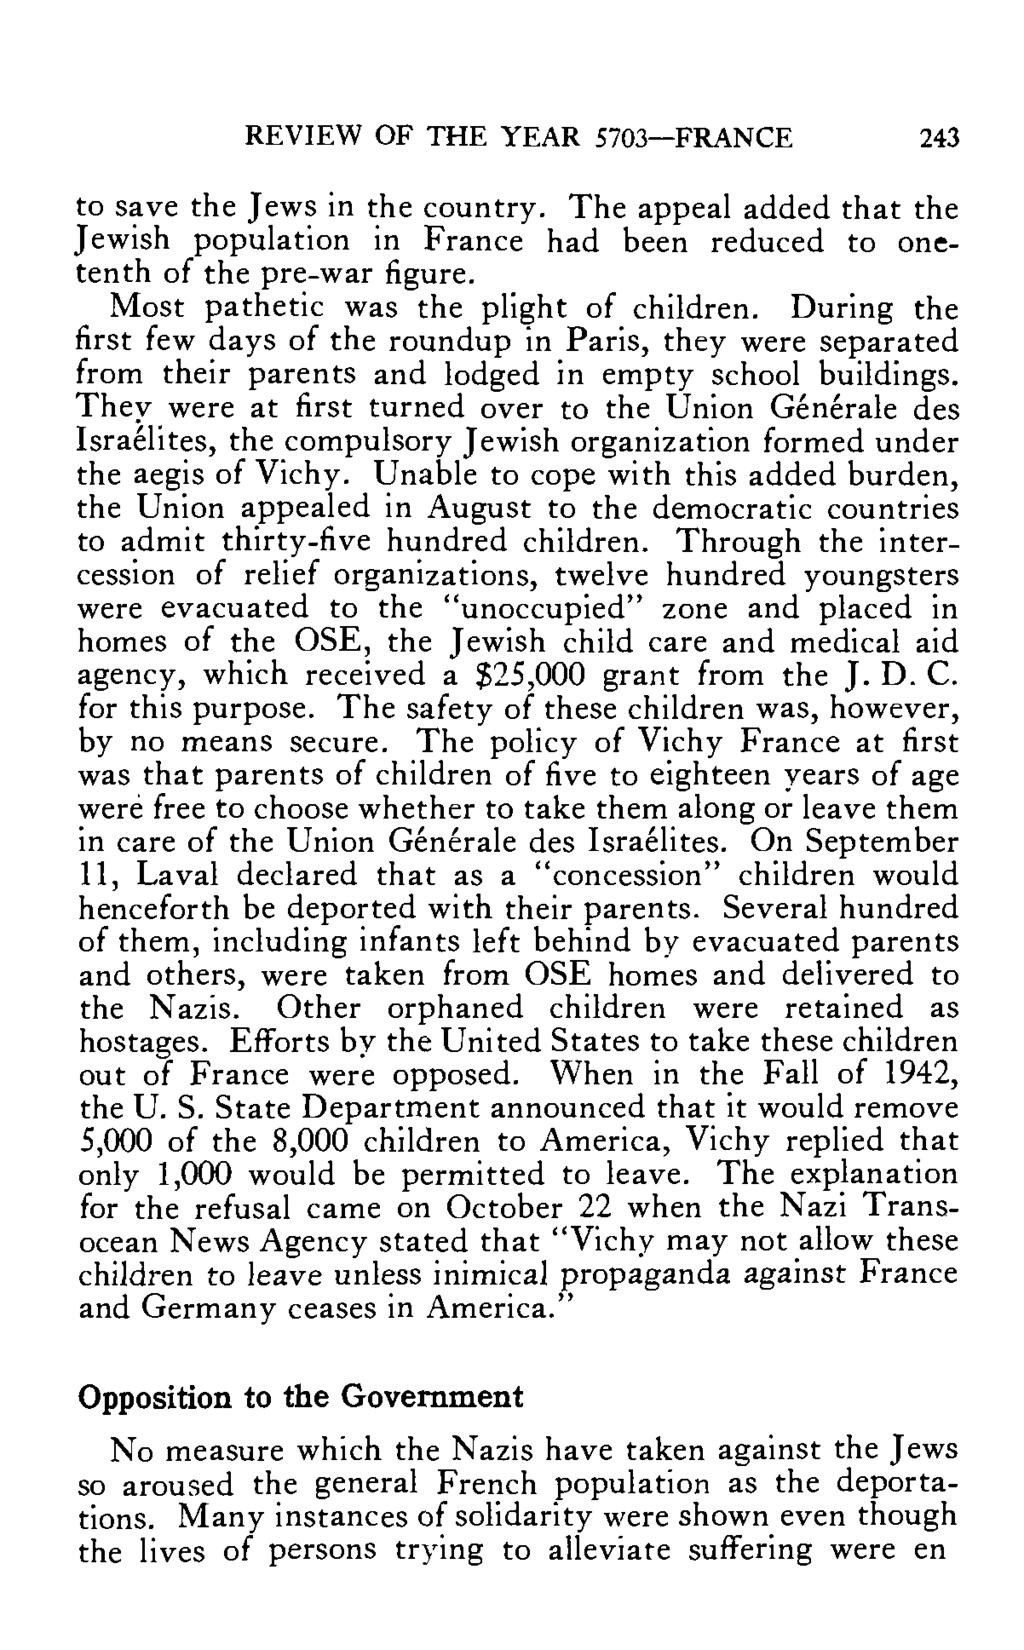 REVIEW OF THE YEAR 5703 FRANCE 243 to save the Jews in the country. The appeal added that the Jewish population in France had been reduced to onetenth of the pre-war figure.